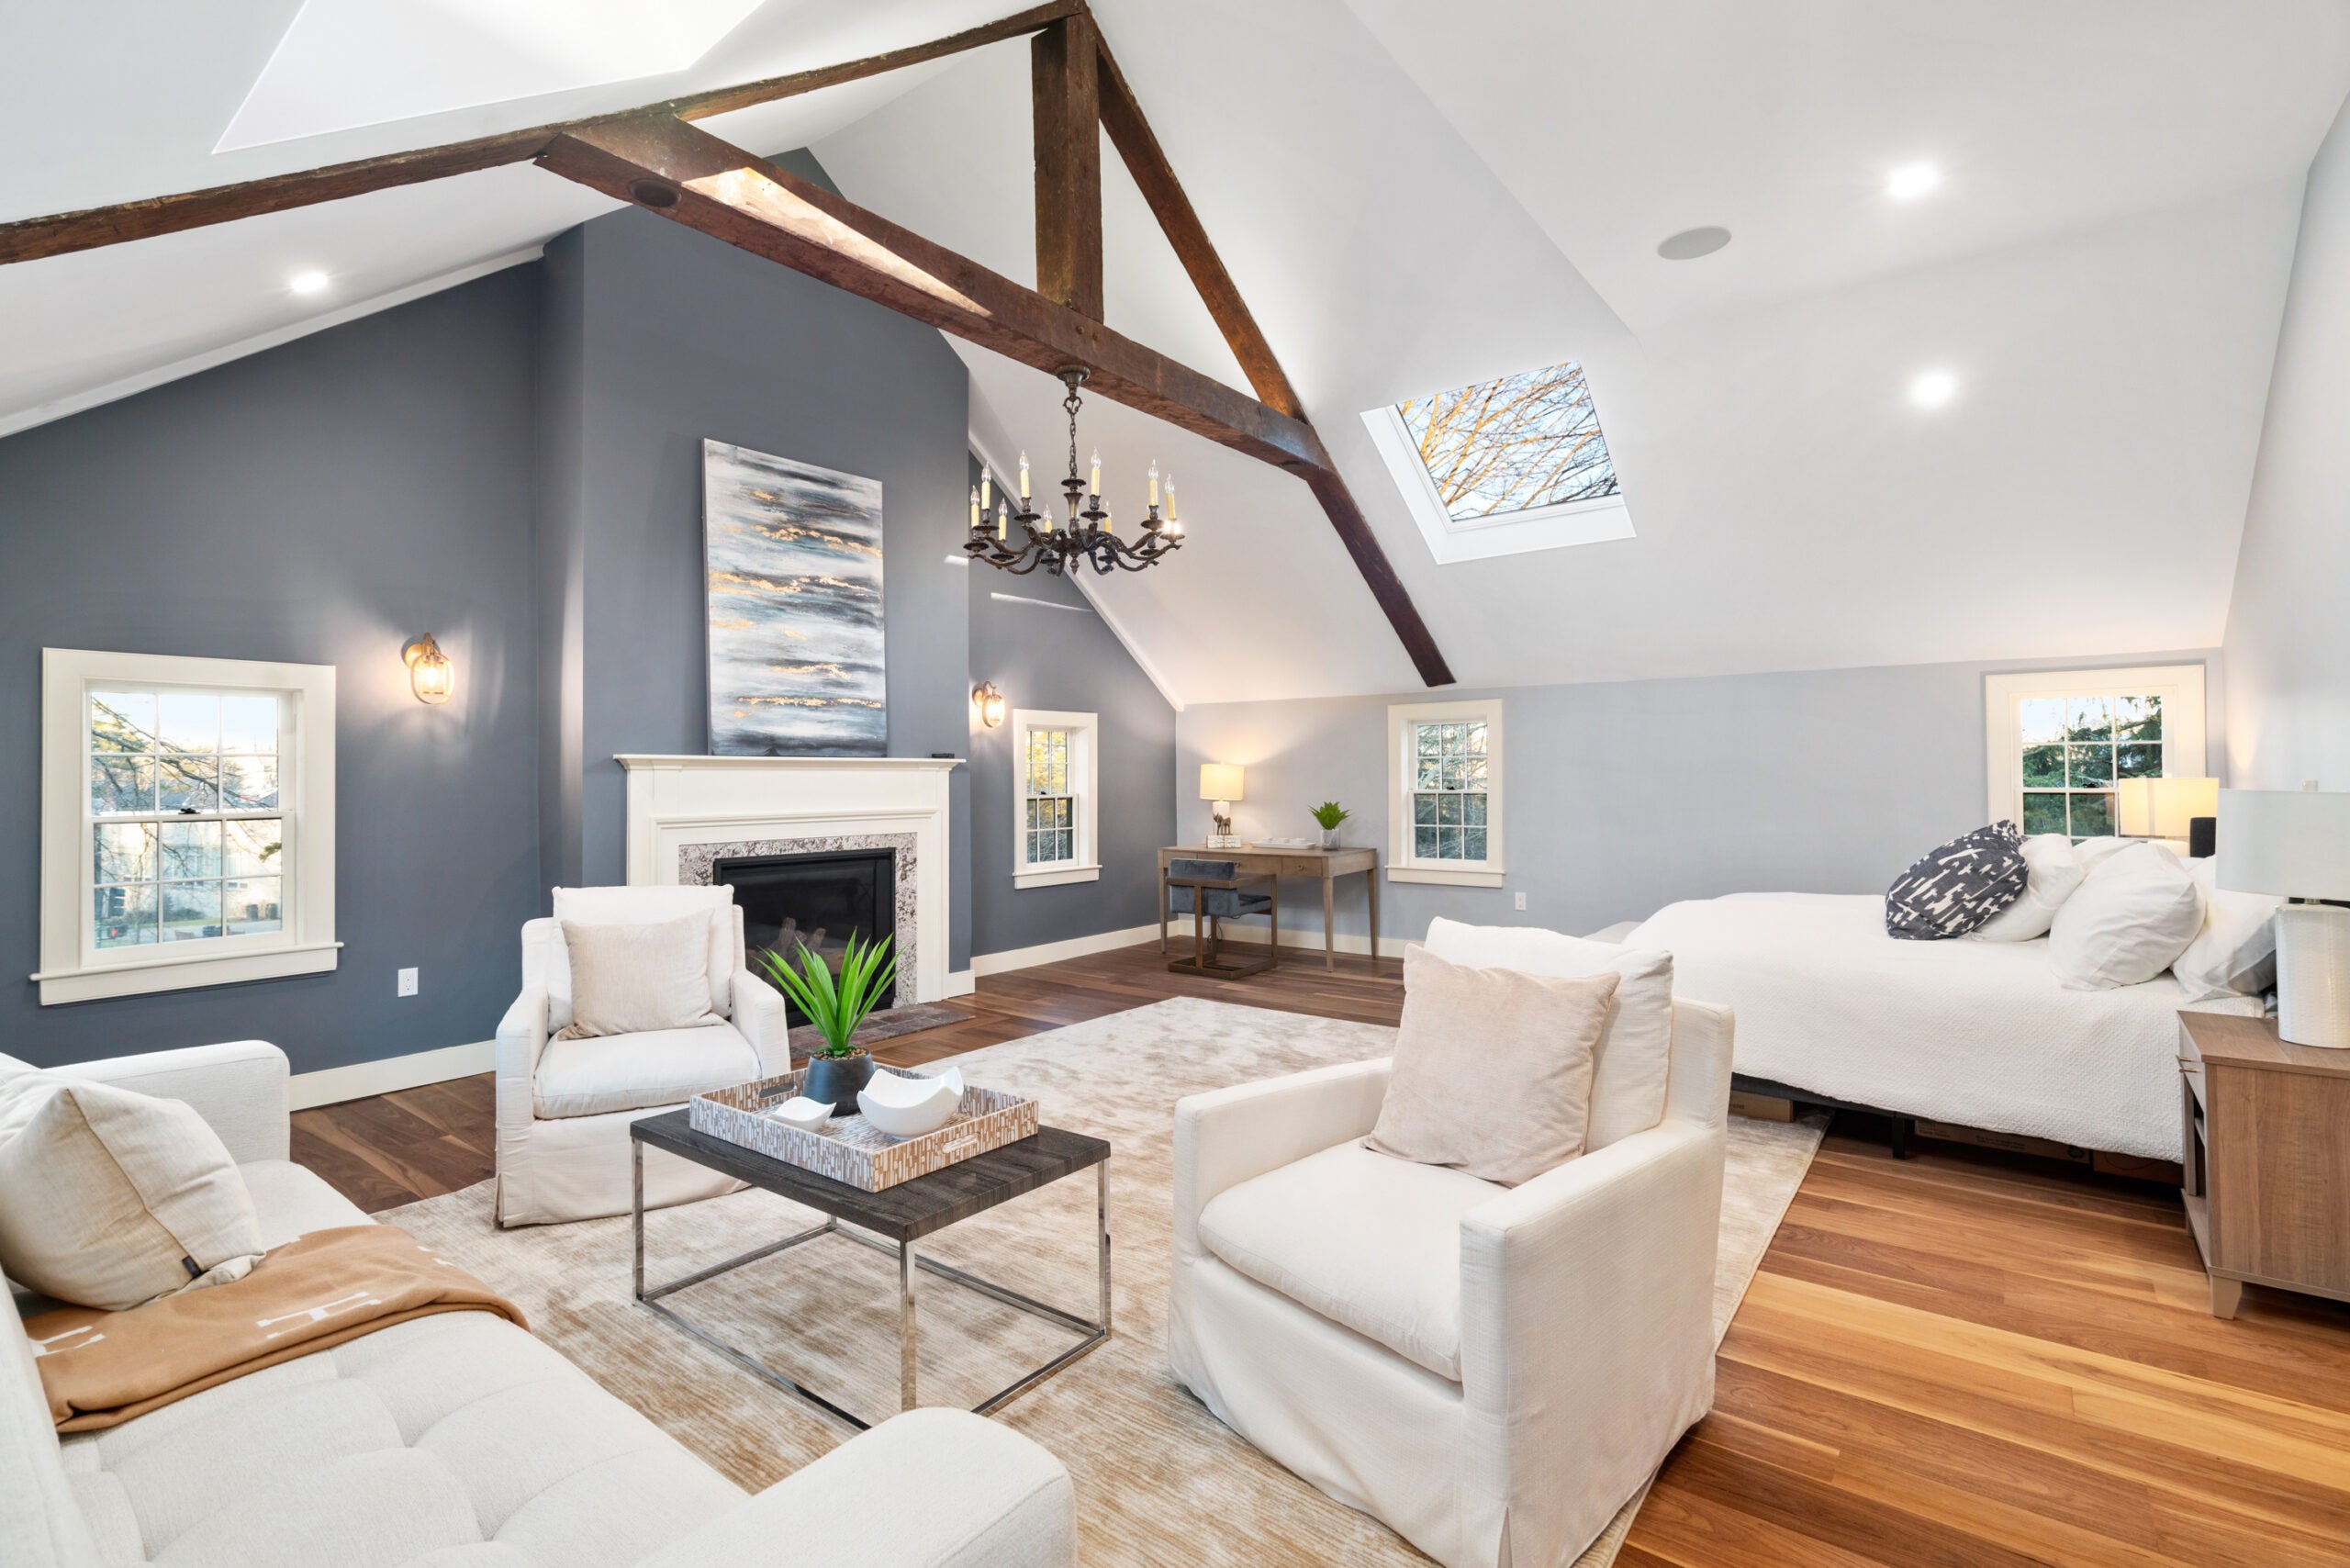 The living room has a vaulted ceiling, hardwood floors, and a fireplace.